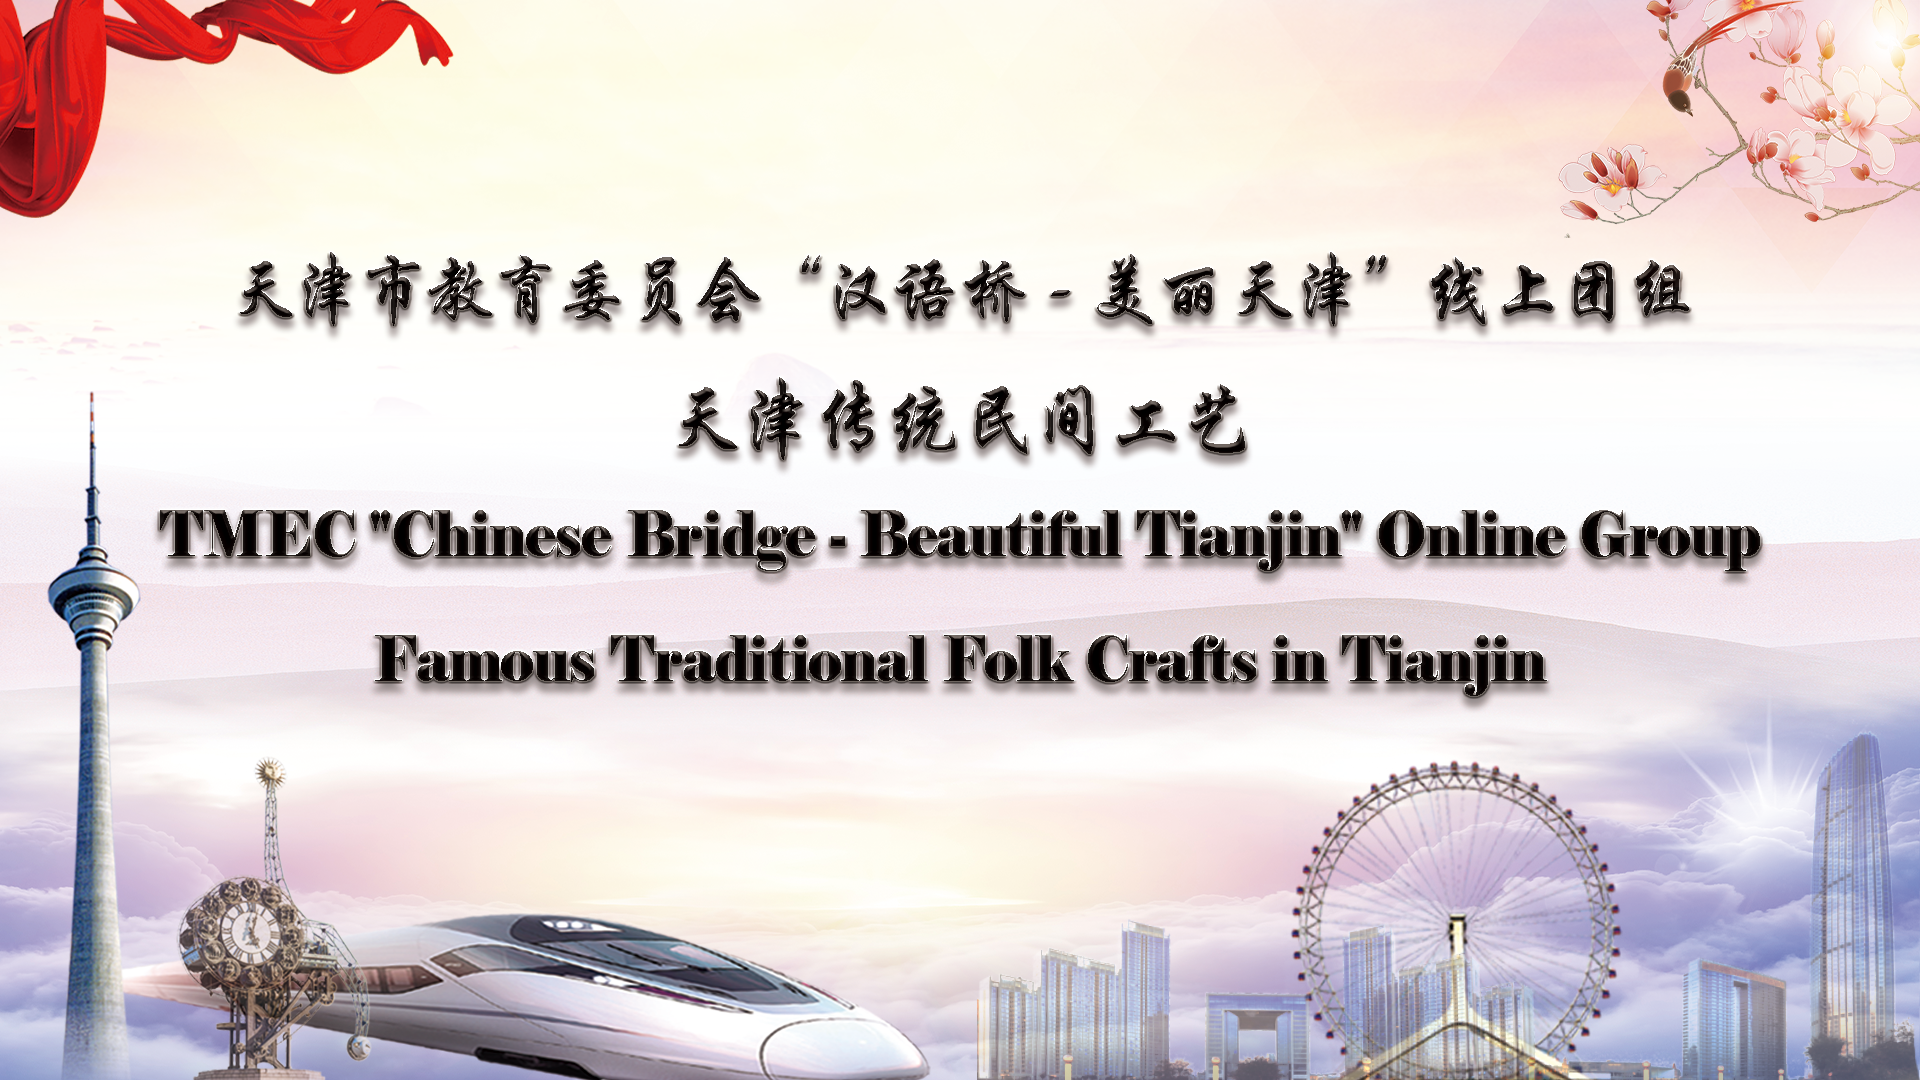 Traditional Folk Crafts in Tianjin